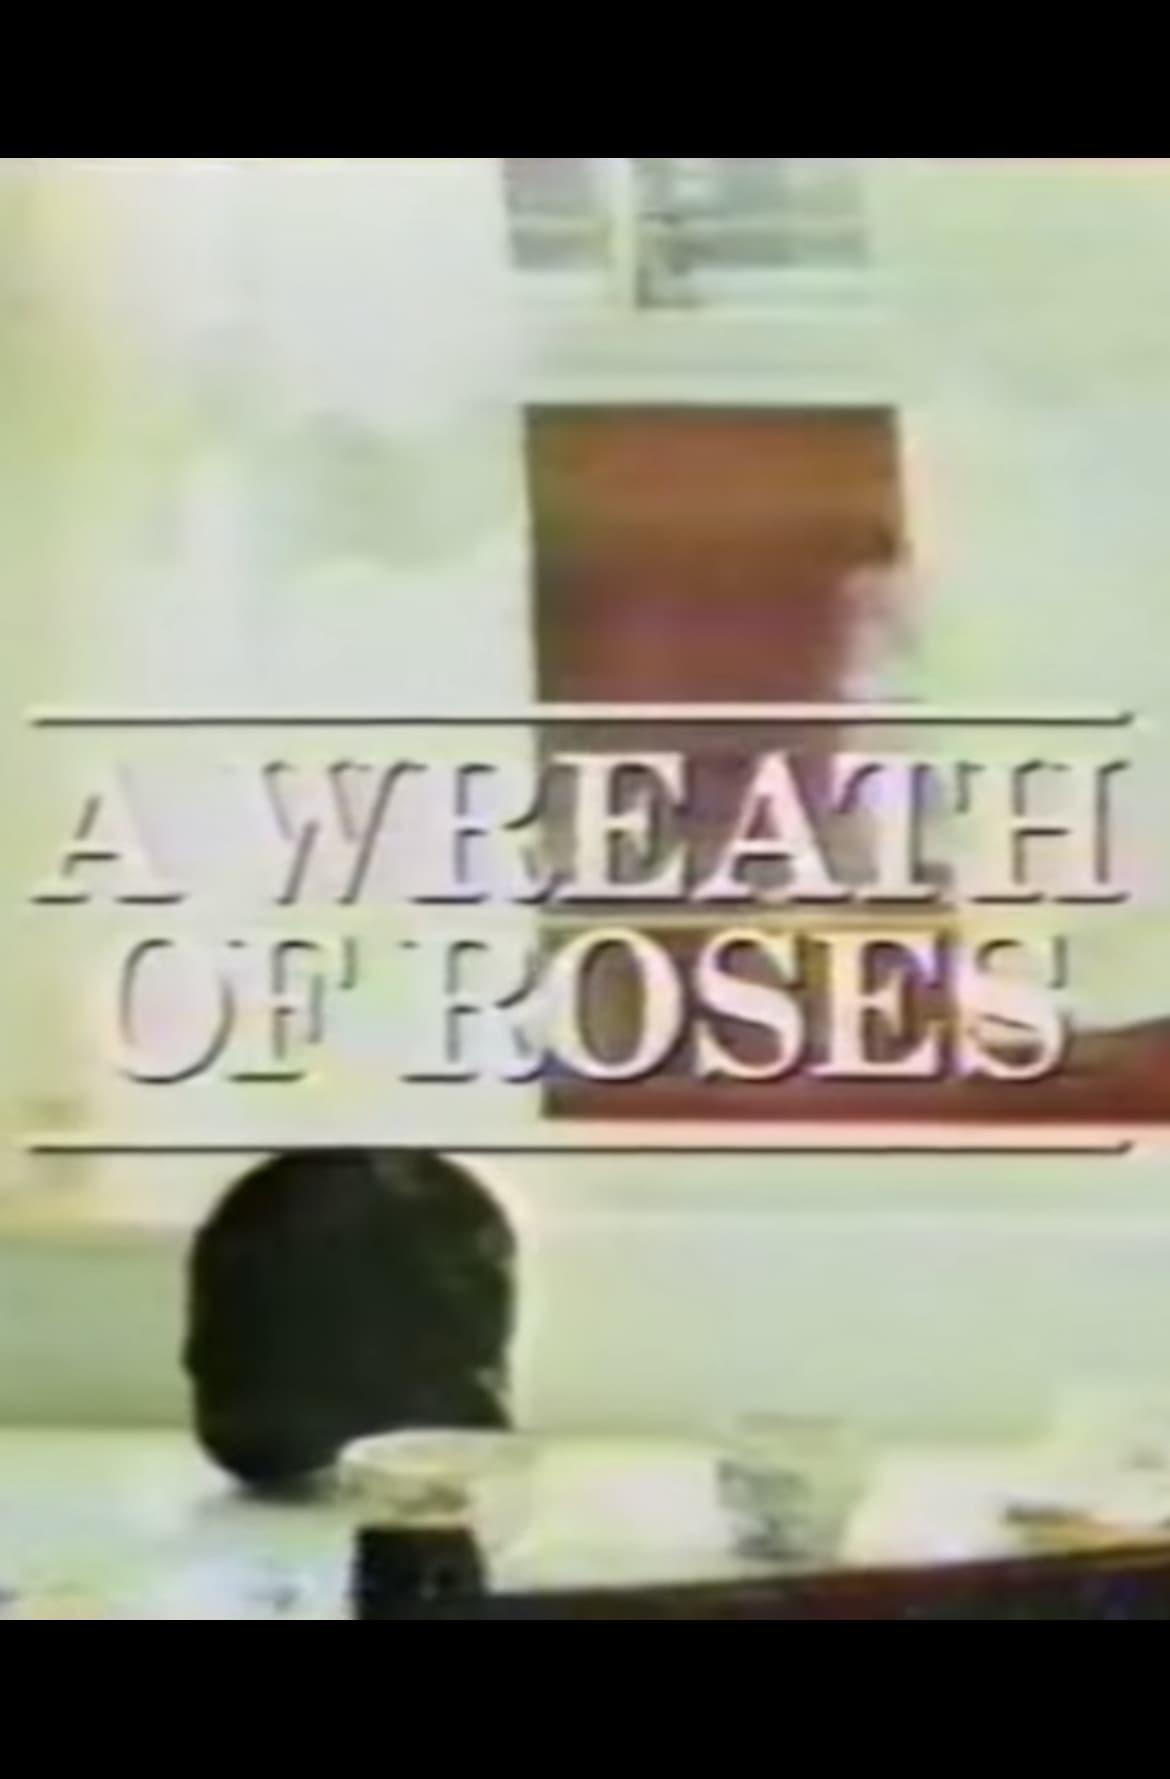 A Wreath of Roses poster